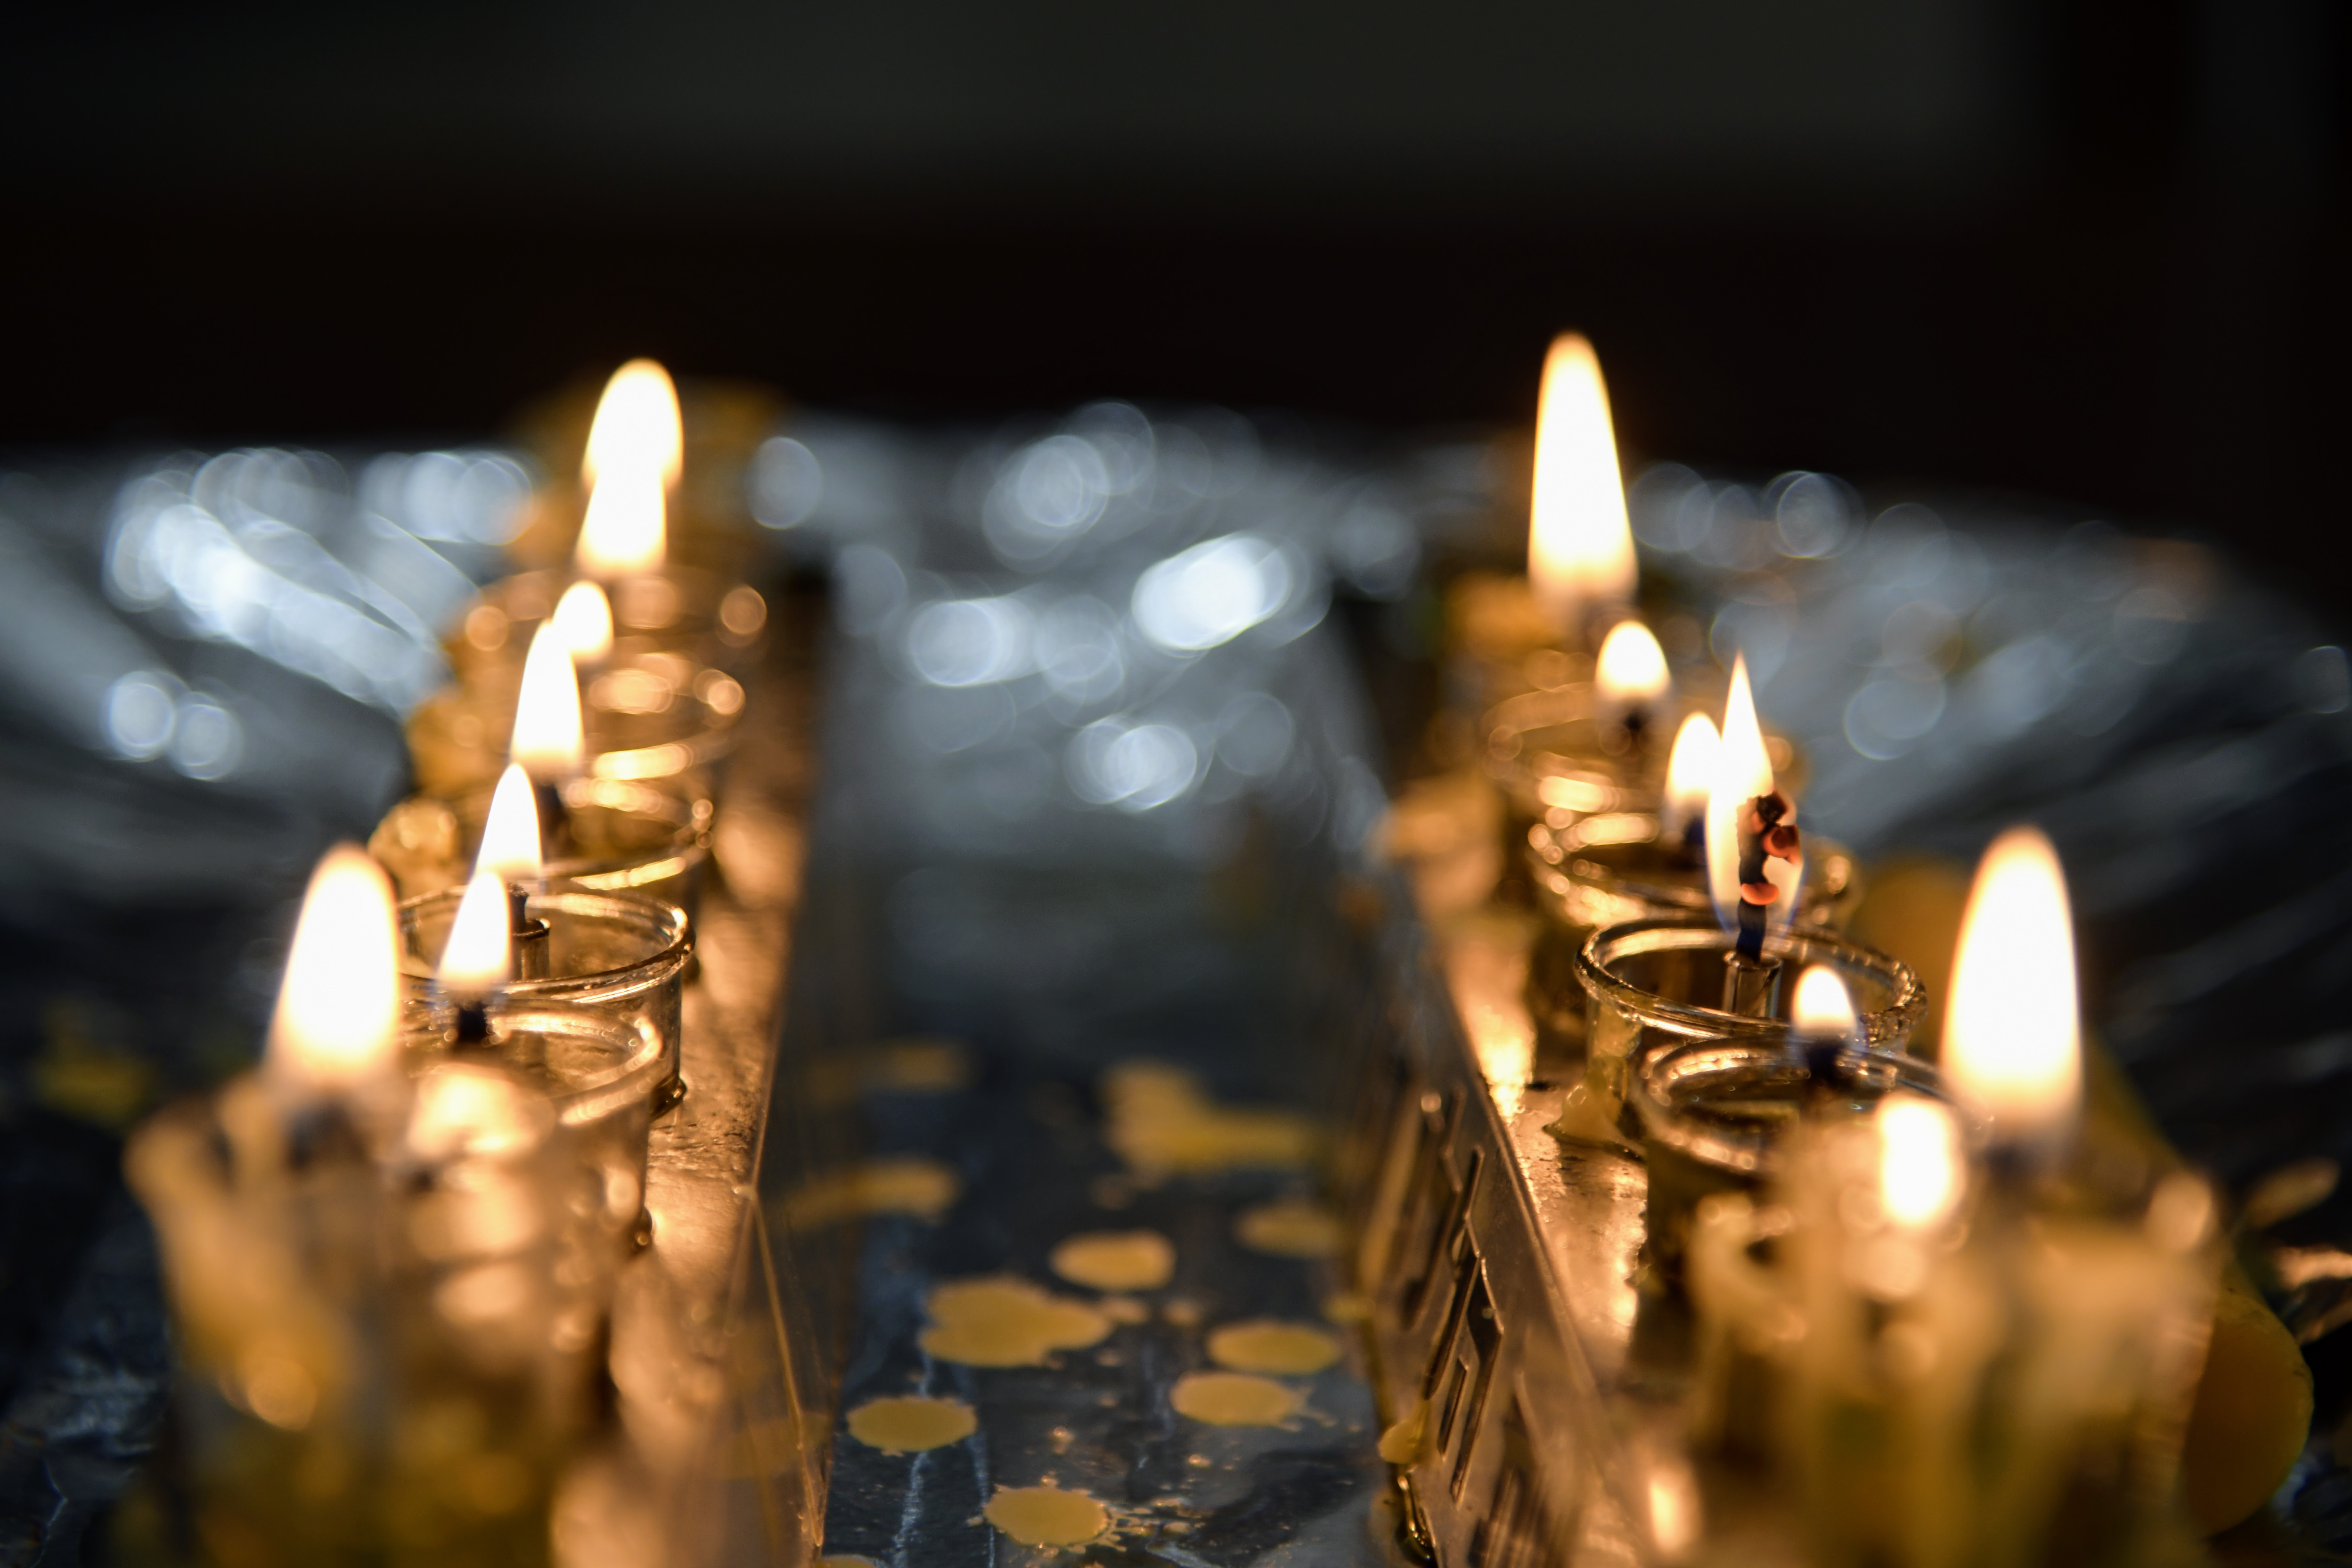 Two Hanukkah menoras with lit candles